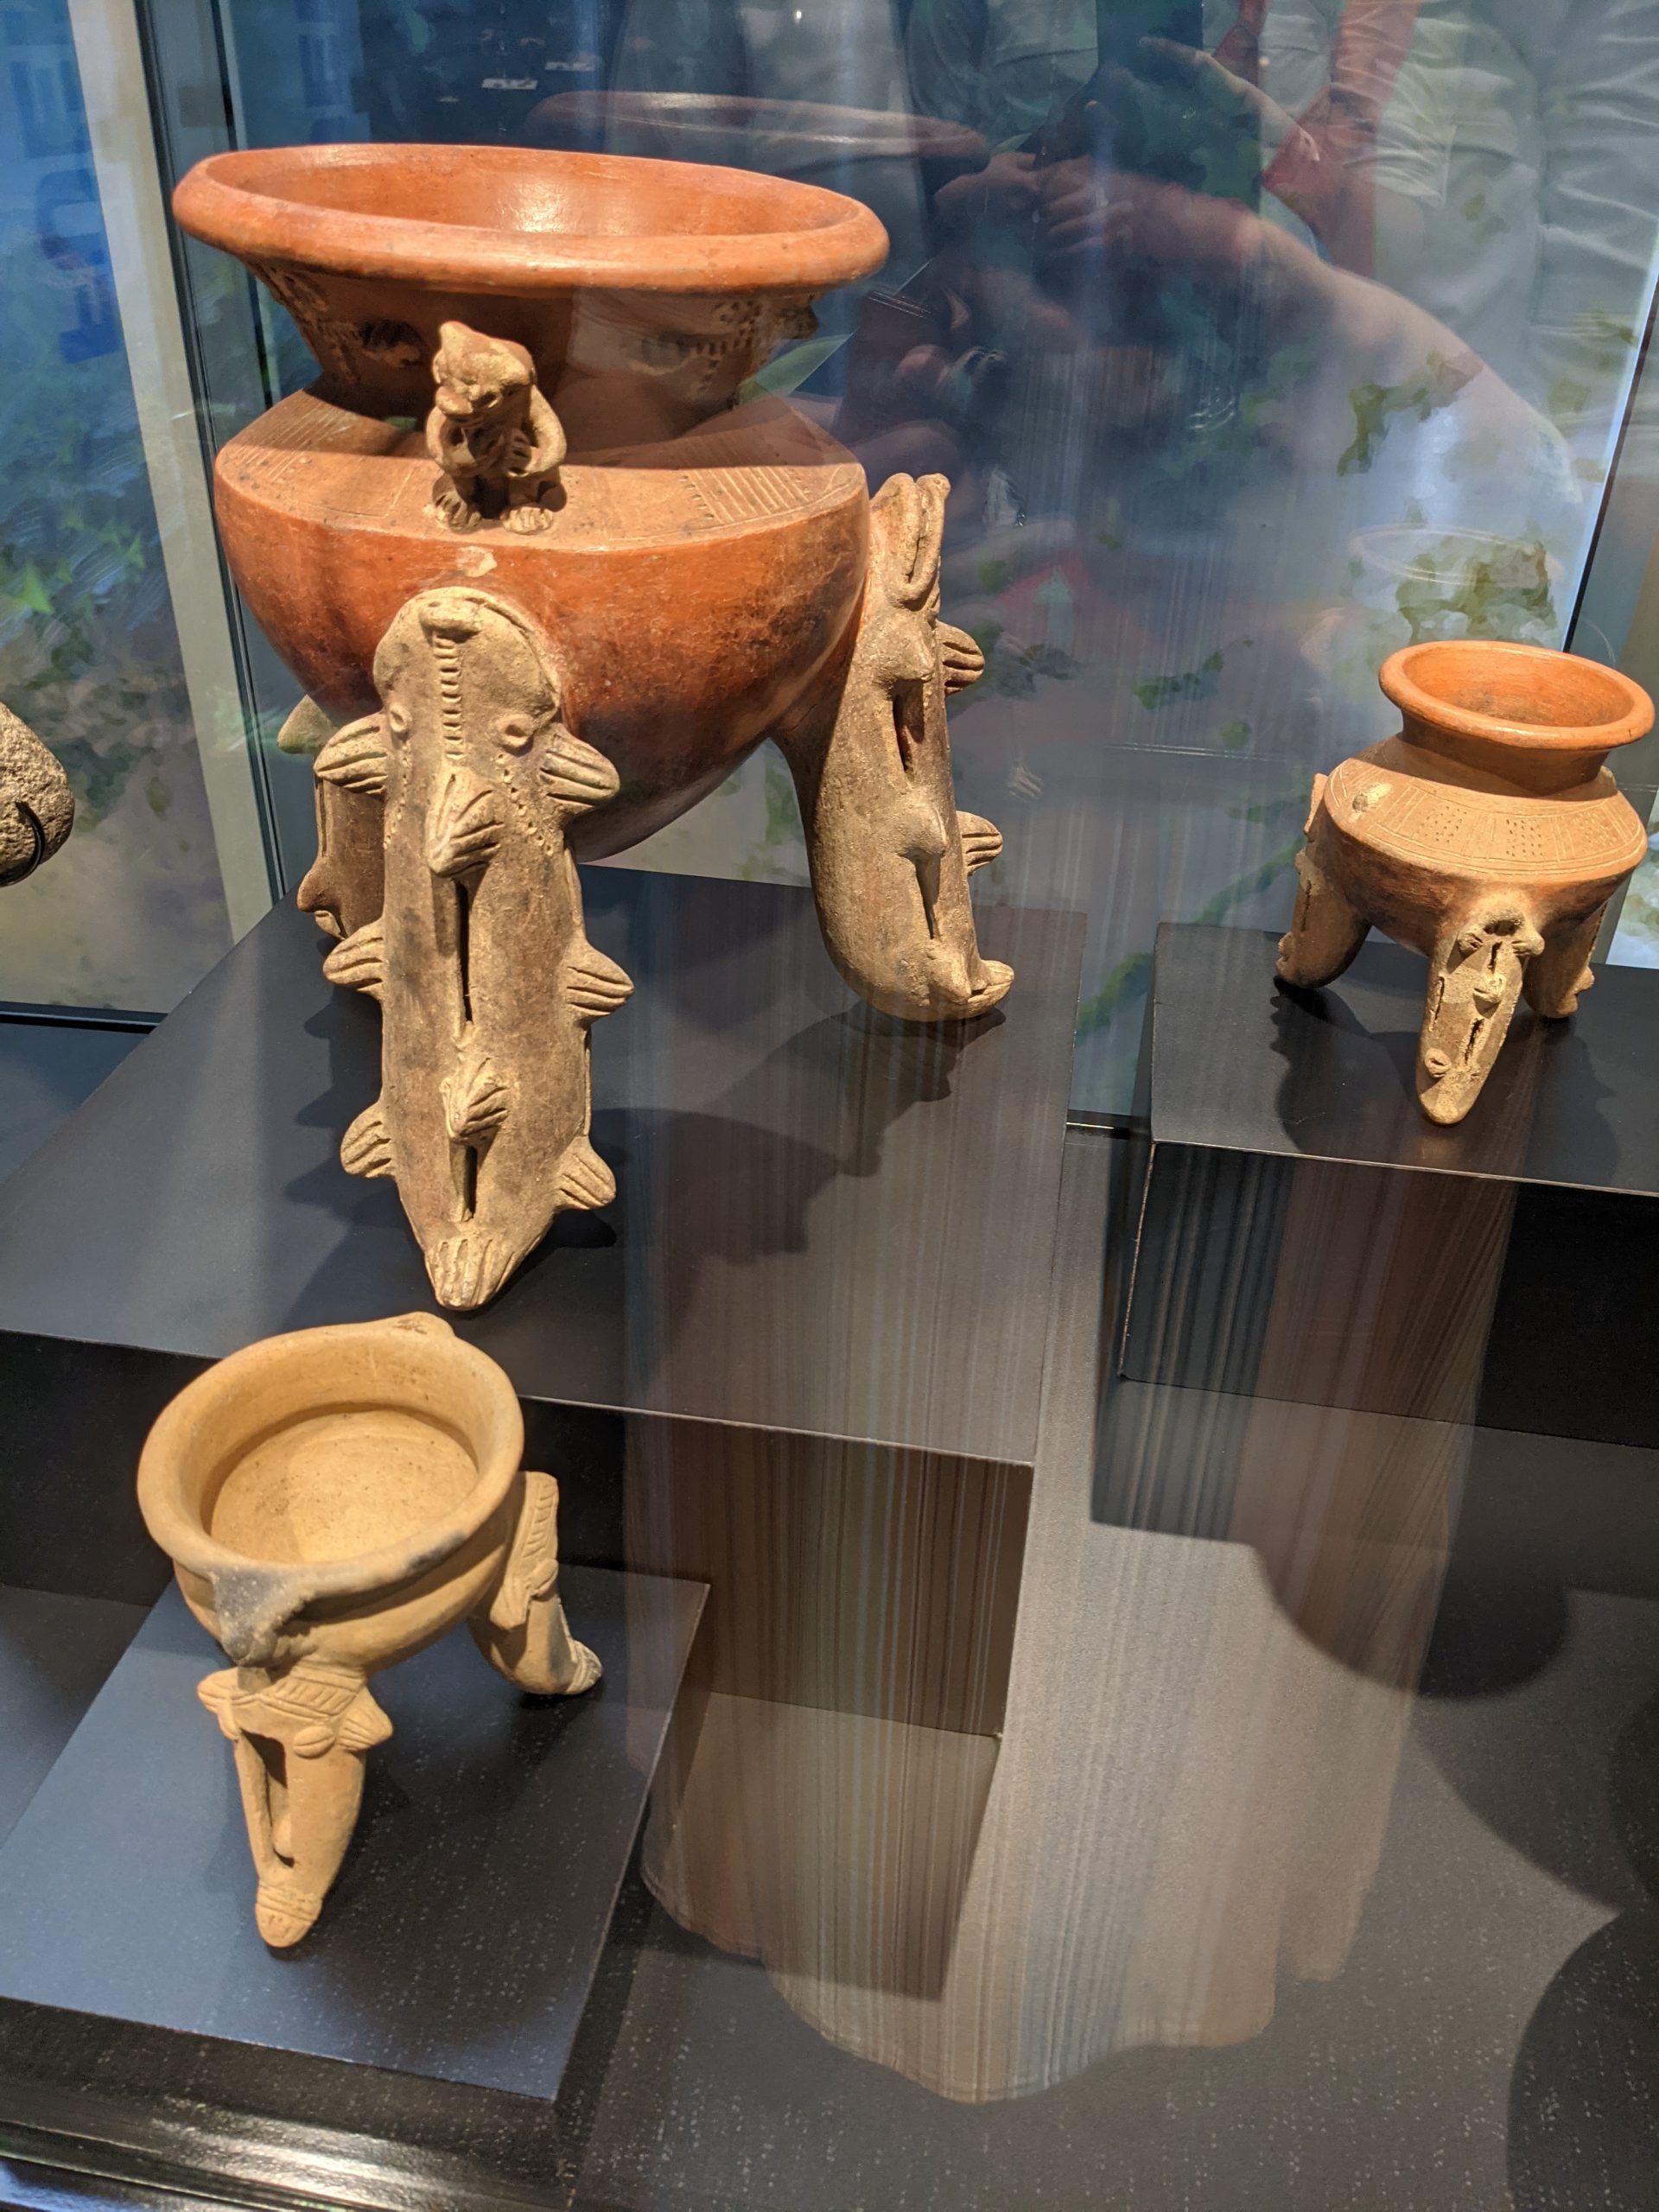 Three pieces of pottery made from Costa Rica's Indigenous tribes that include sea creatures